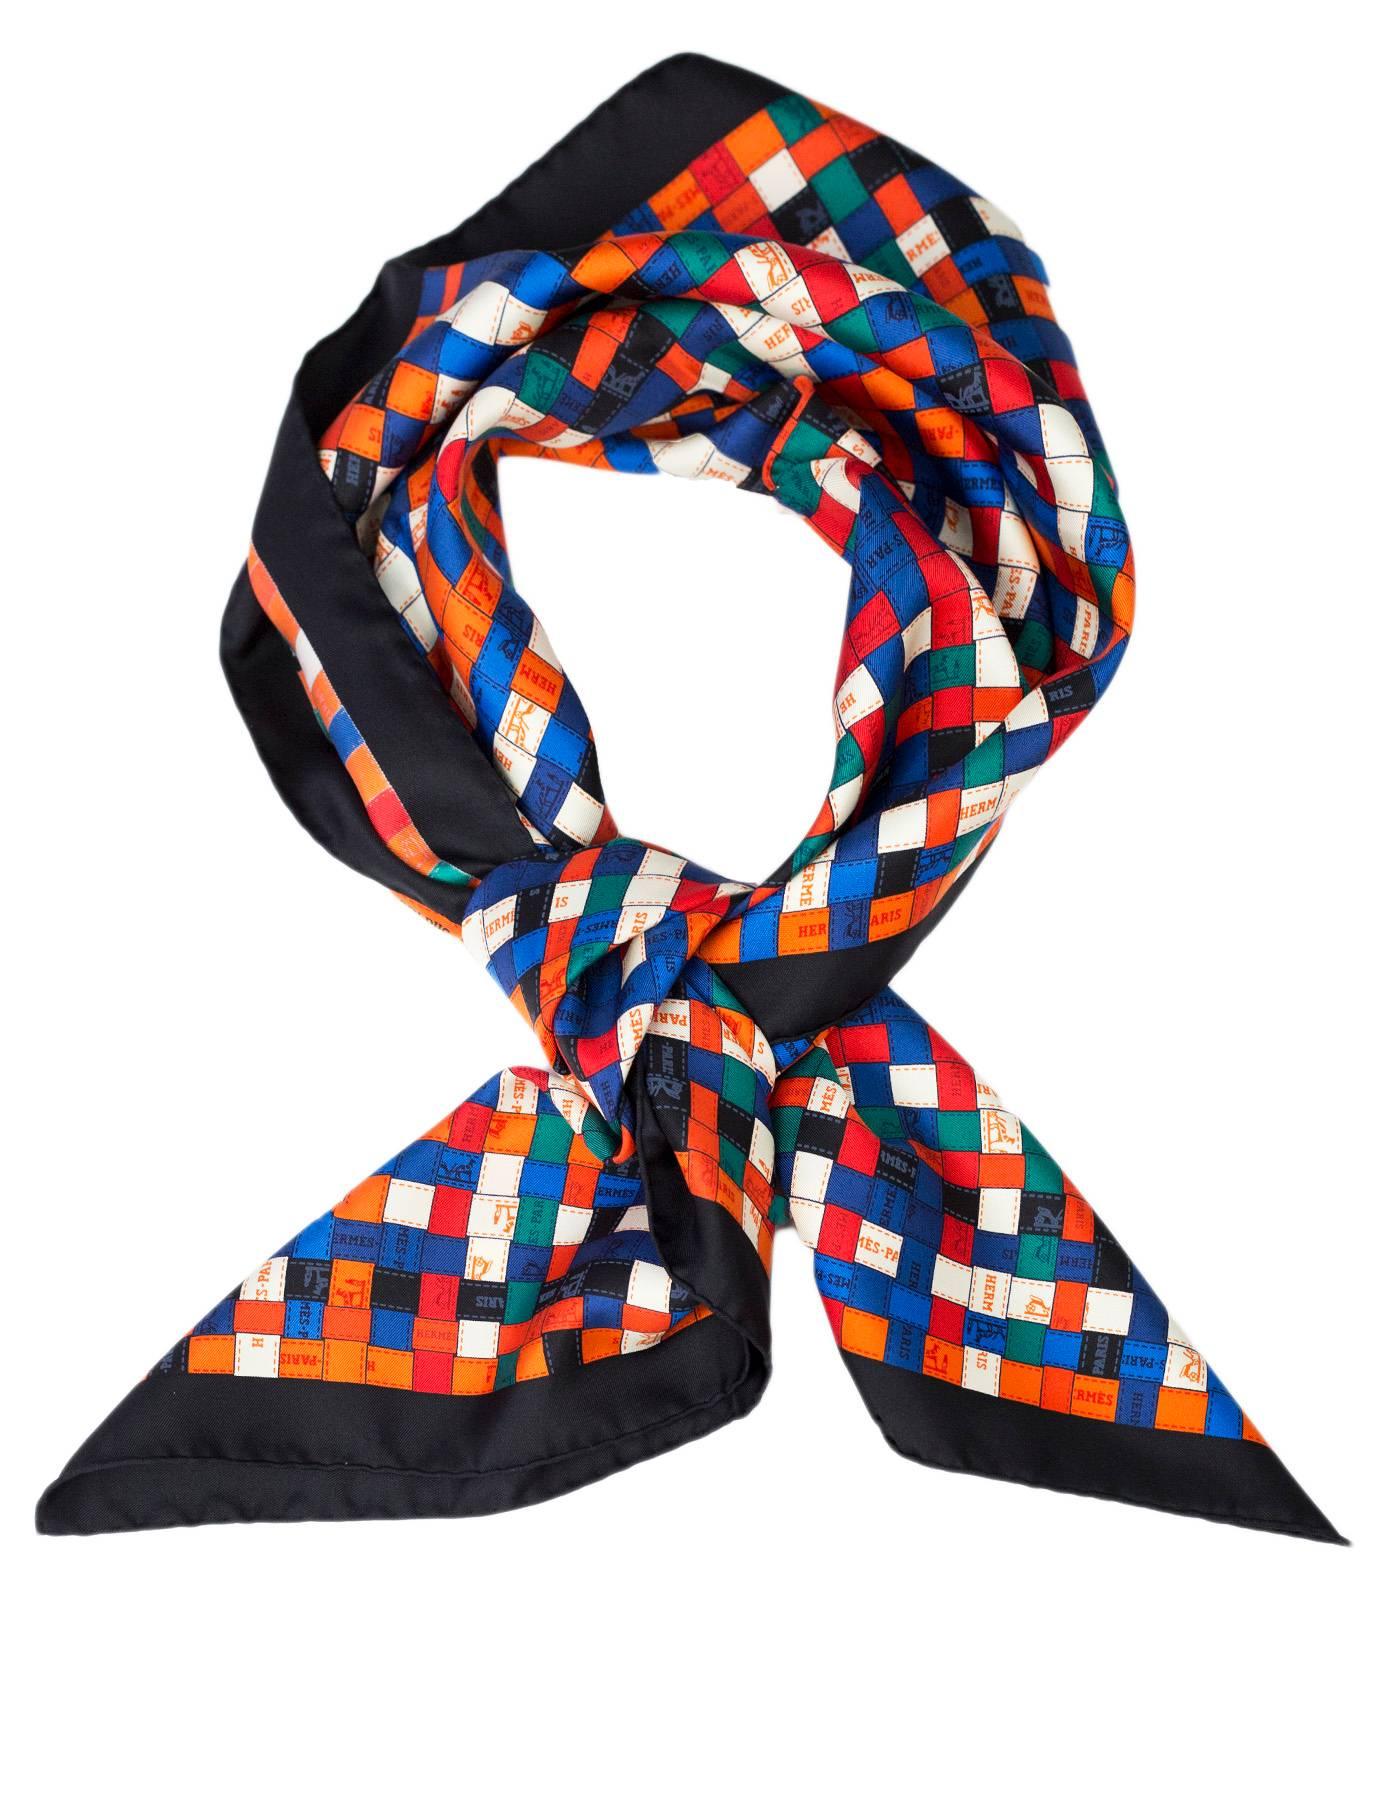 Hermes Multi-Colored Bolduc au Carre Silk 90cm Scarf NWT

Made In: France
Color: Multi
Composition: 100% Silk
Retail Price: $395 + tax
Overall Condition: Excellent pre-owned condition - NWT
Included: Hermes box, tag

Measurements:
Length: